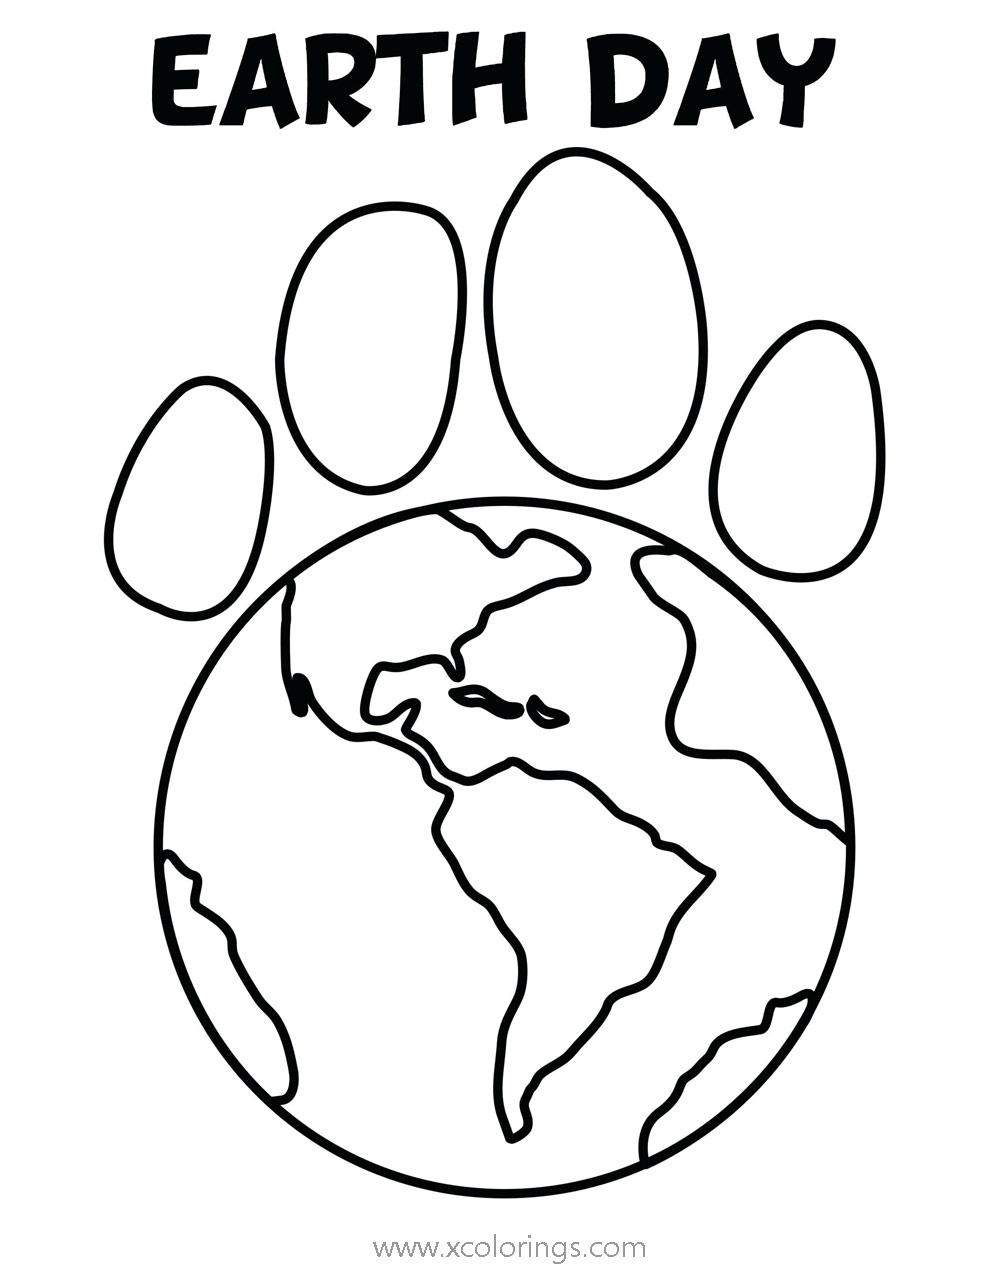 Free Earth Day Coloring Pages for Preschoolers printable